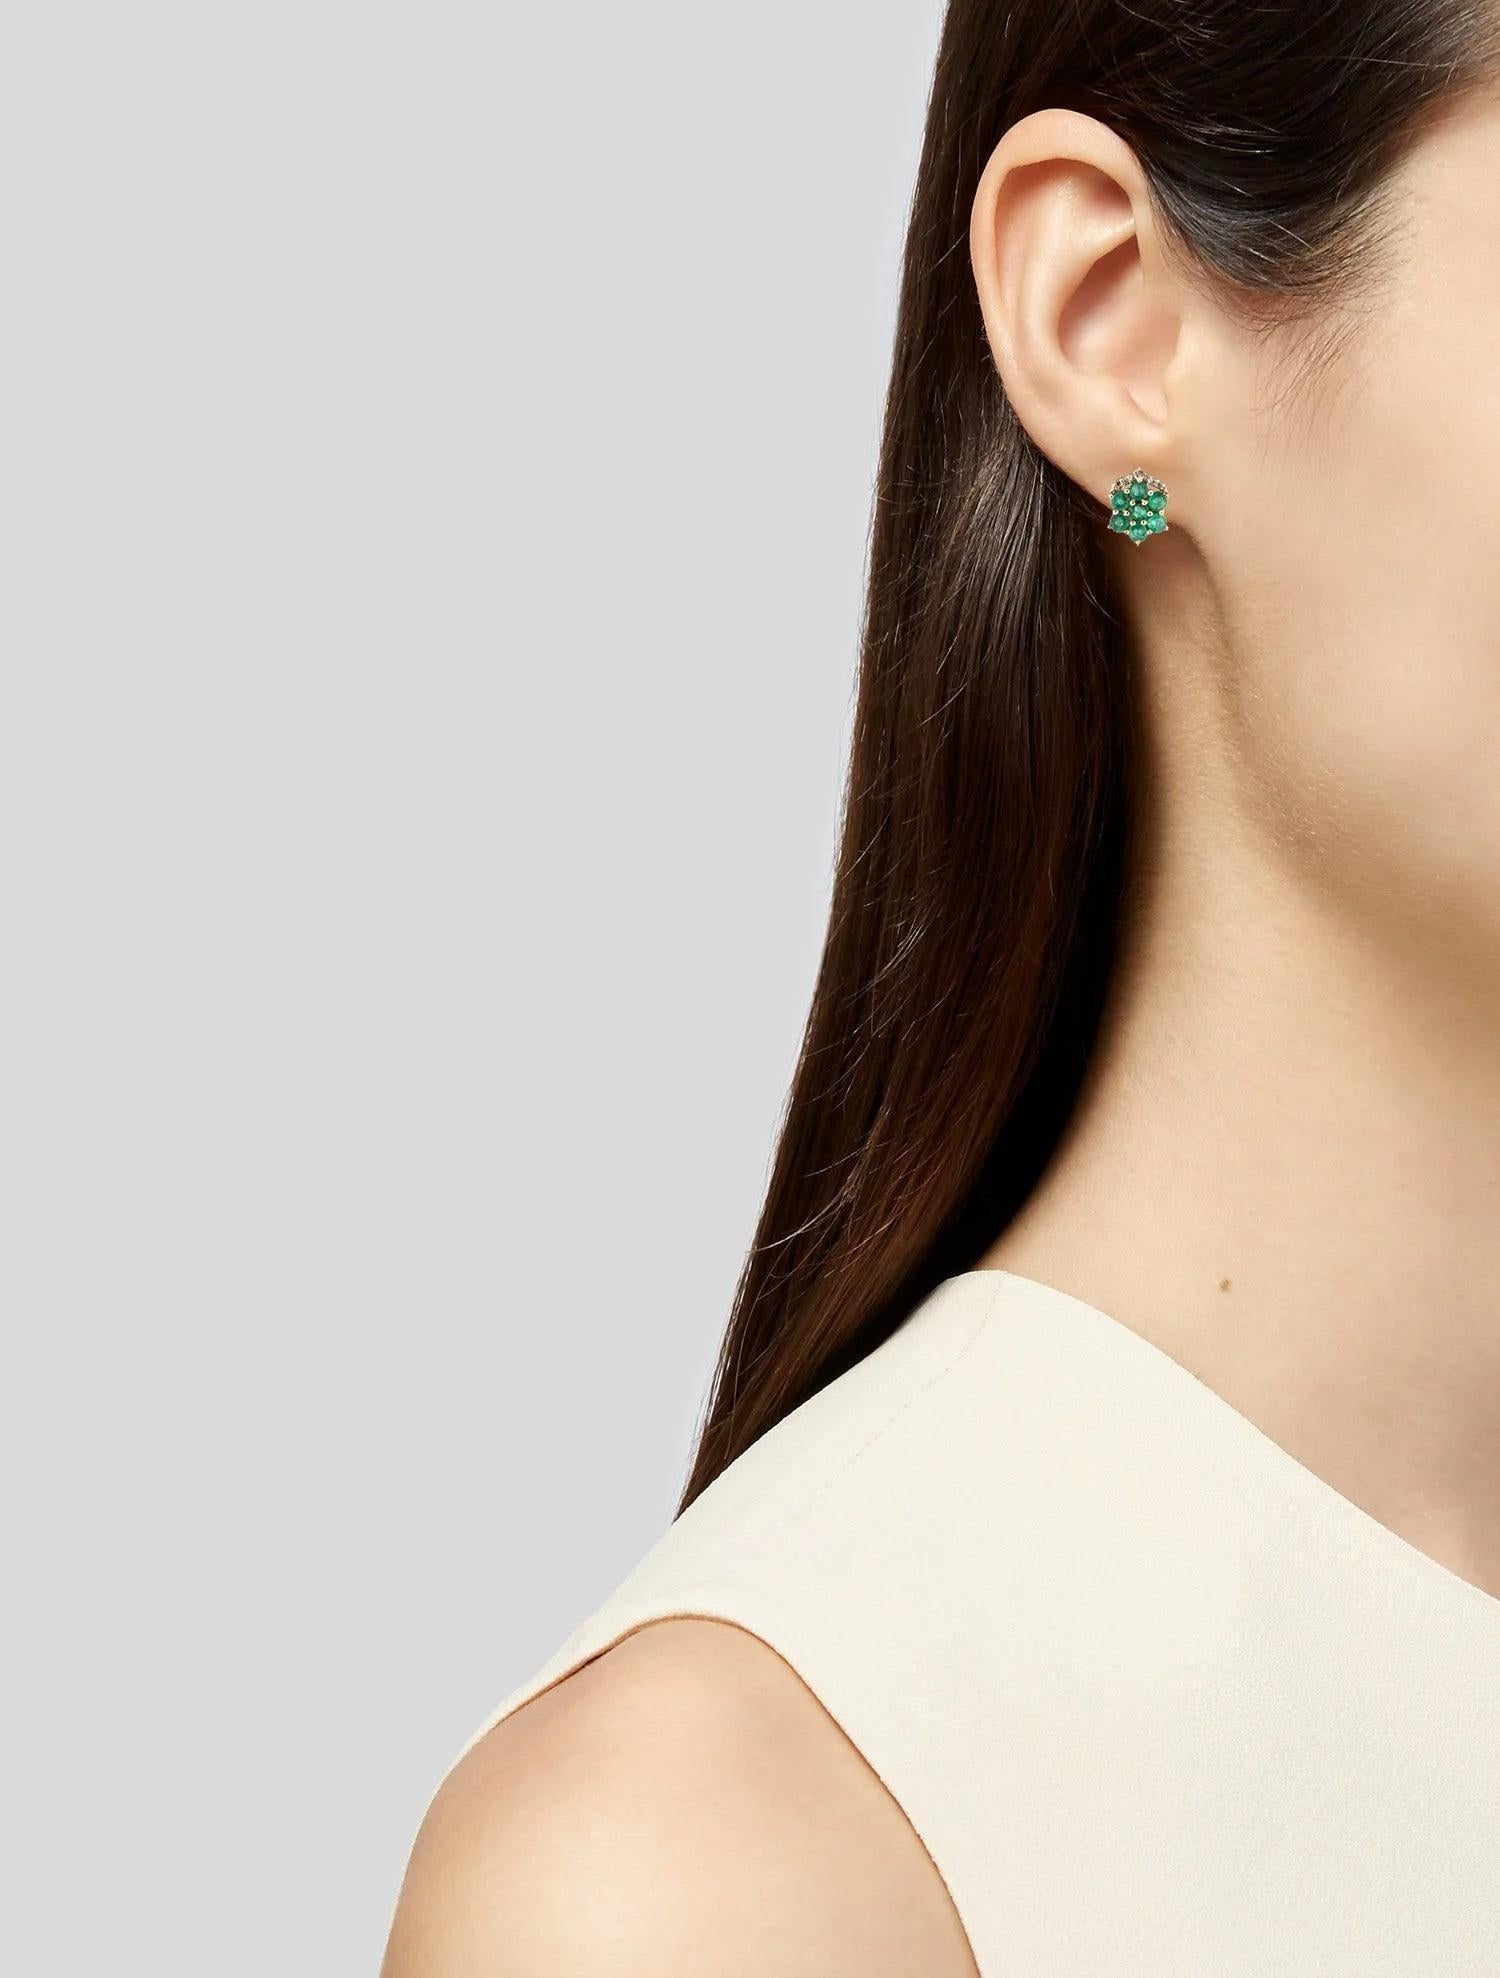 Discover timeless elegance with these exquisite 14K yellow gold earrings, each featuring a captivating 1.24 carat round modified brilliant emerald at its heart, surrounded by the subtle sparkle of near colorless diamonds. These earrings embody the